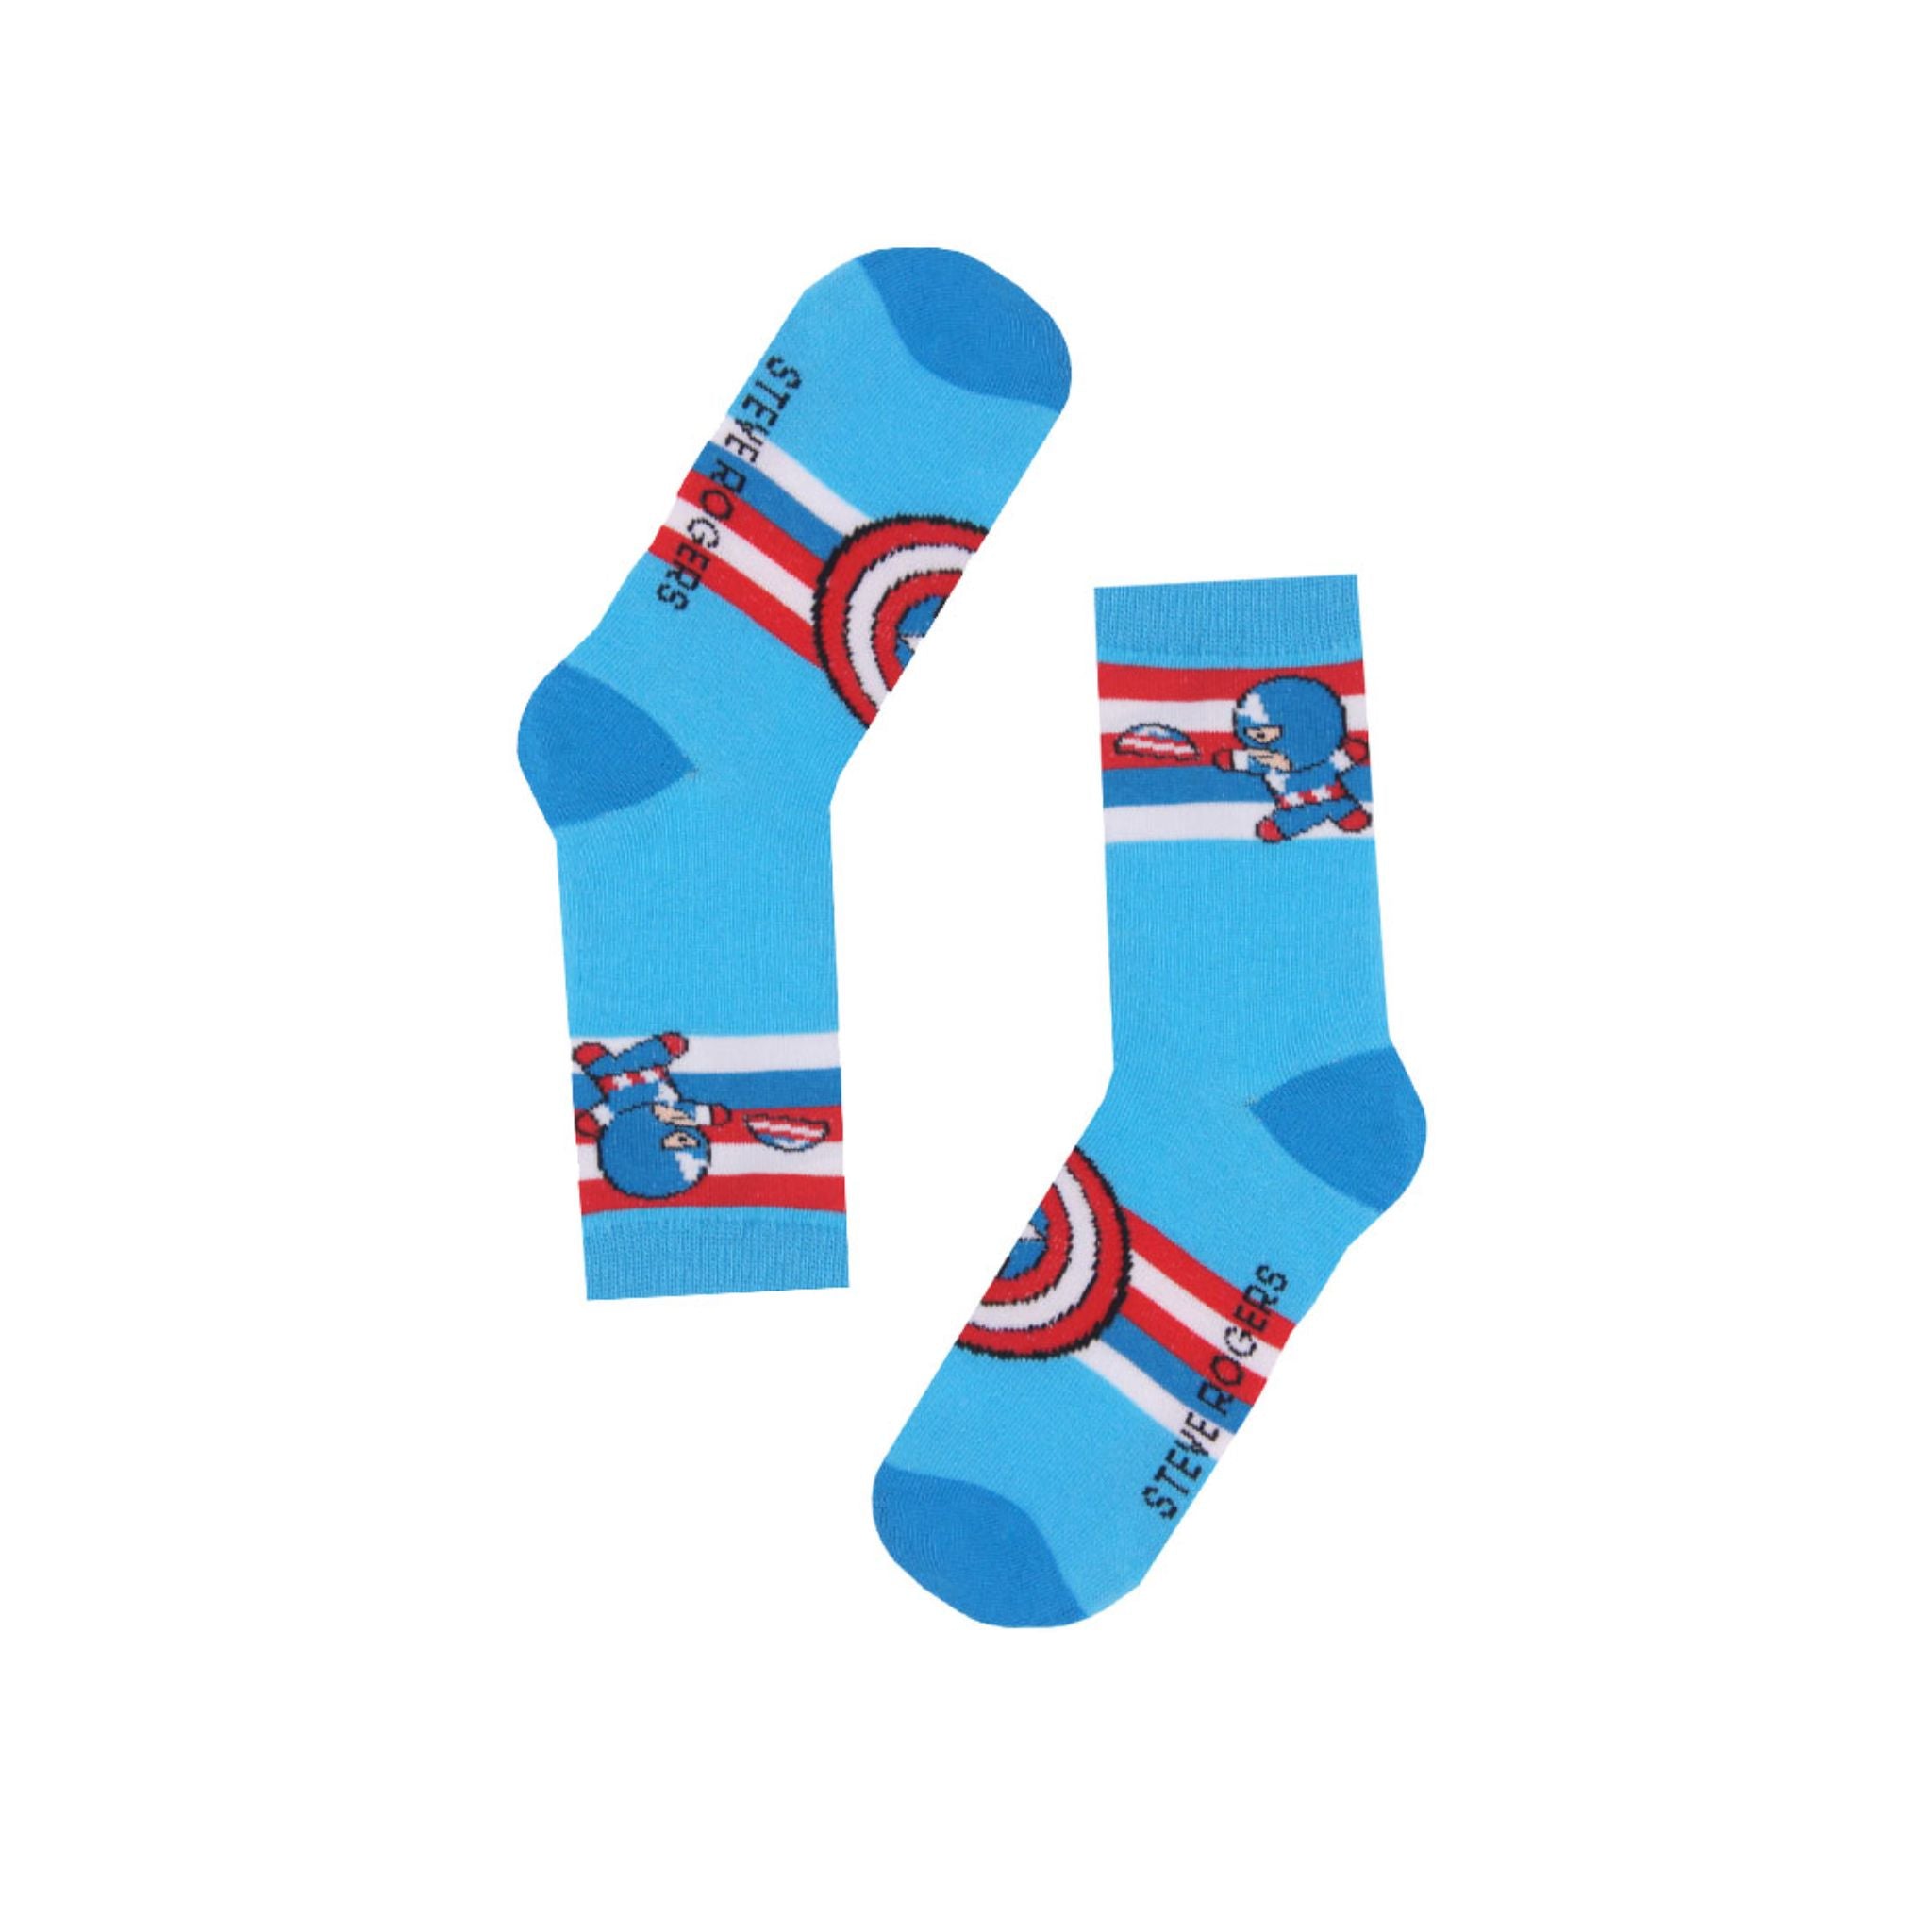 RAD RUSSEL Captain America Kids Socks - Ages 2 to 7 - Blue